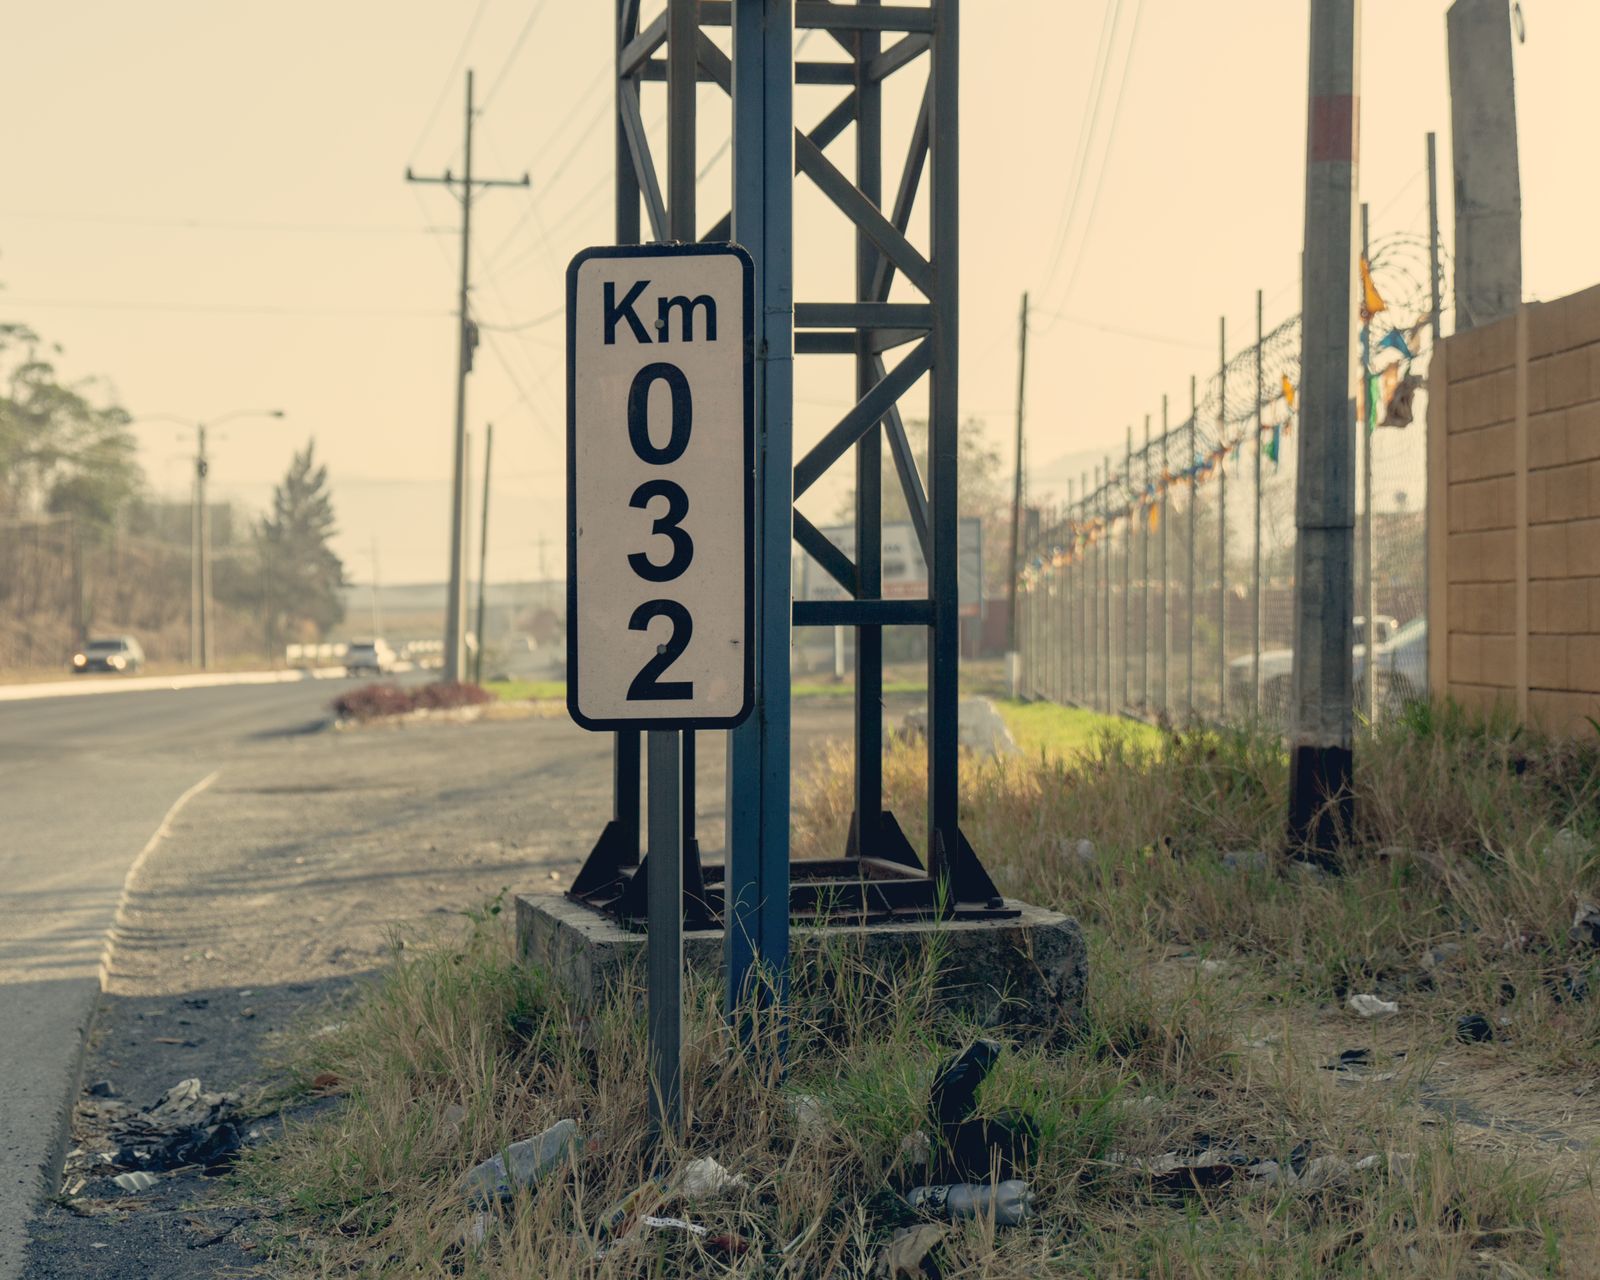 KM 32. A proof of life was left by the abductors in the back part of this sign. © Luis Corzo